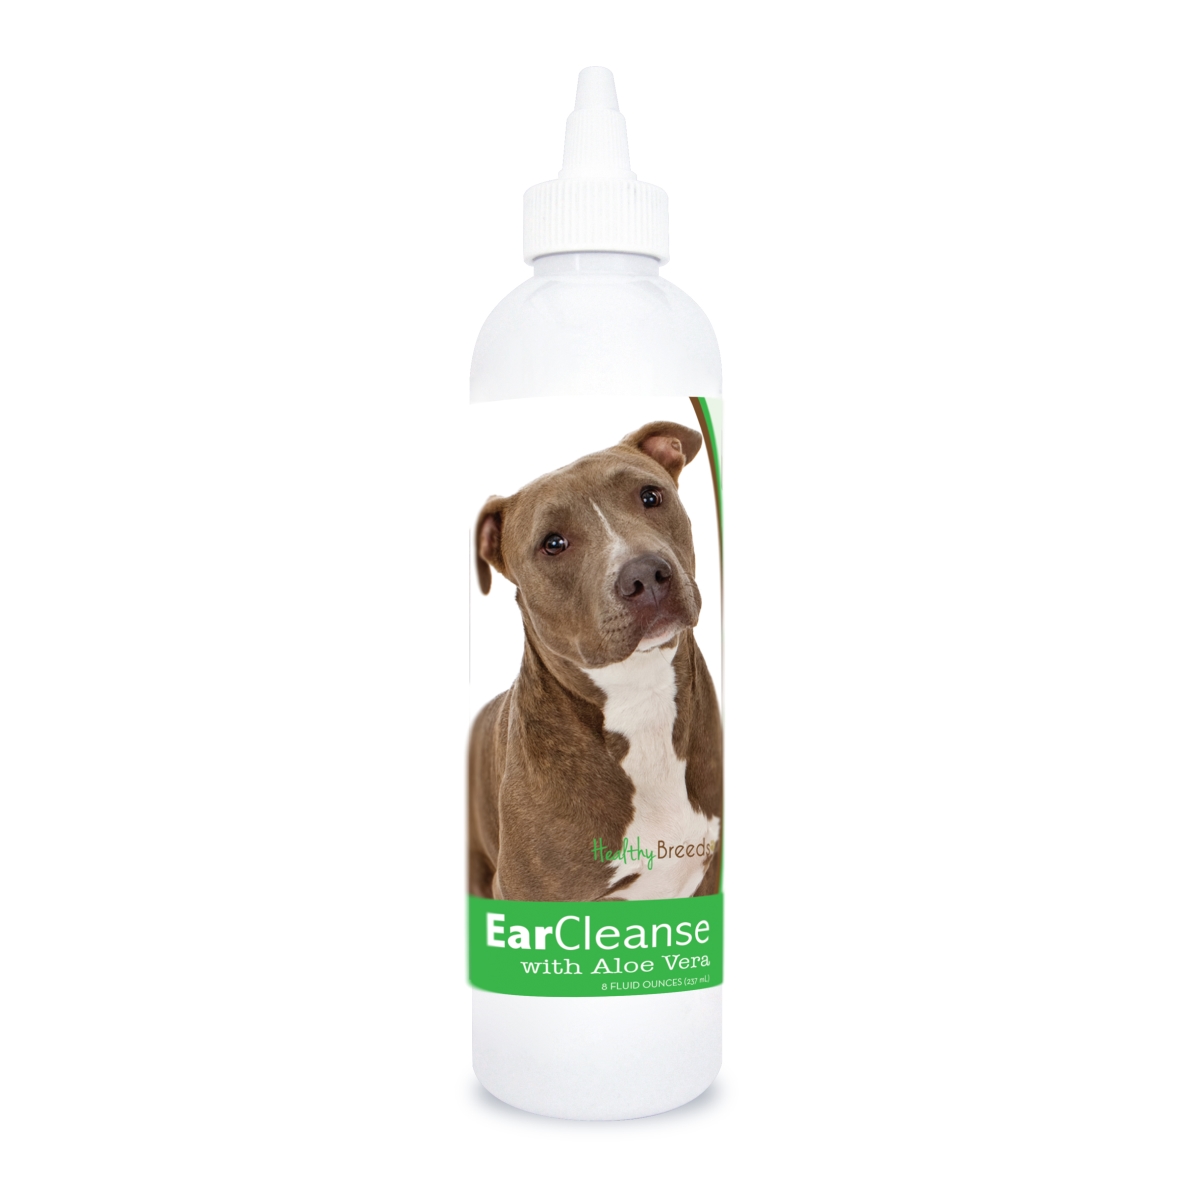 840235197638 8 oz Pit Bull Ear Cleanse with Aloe Vera Cucumber Melon -  Healthy Breeds